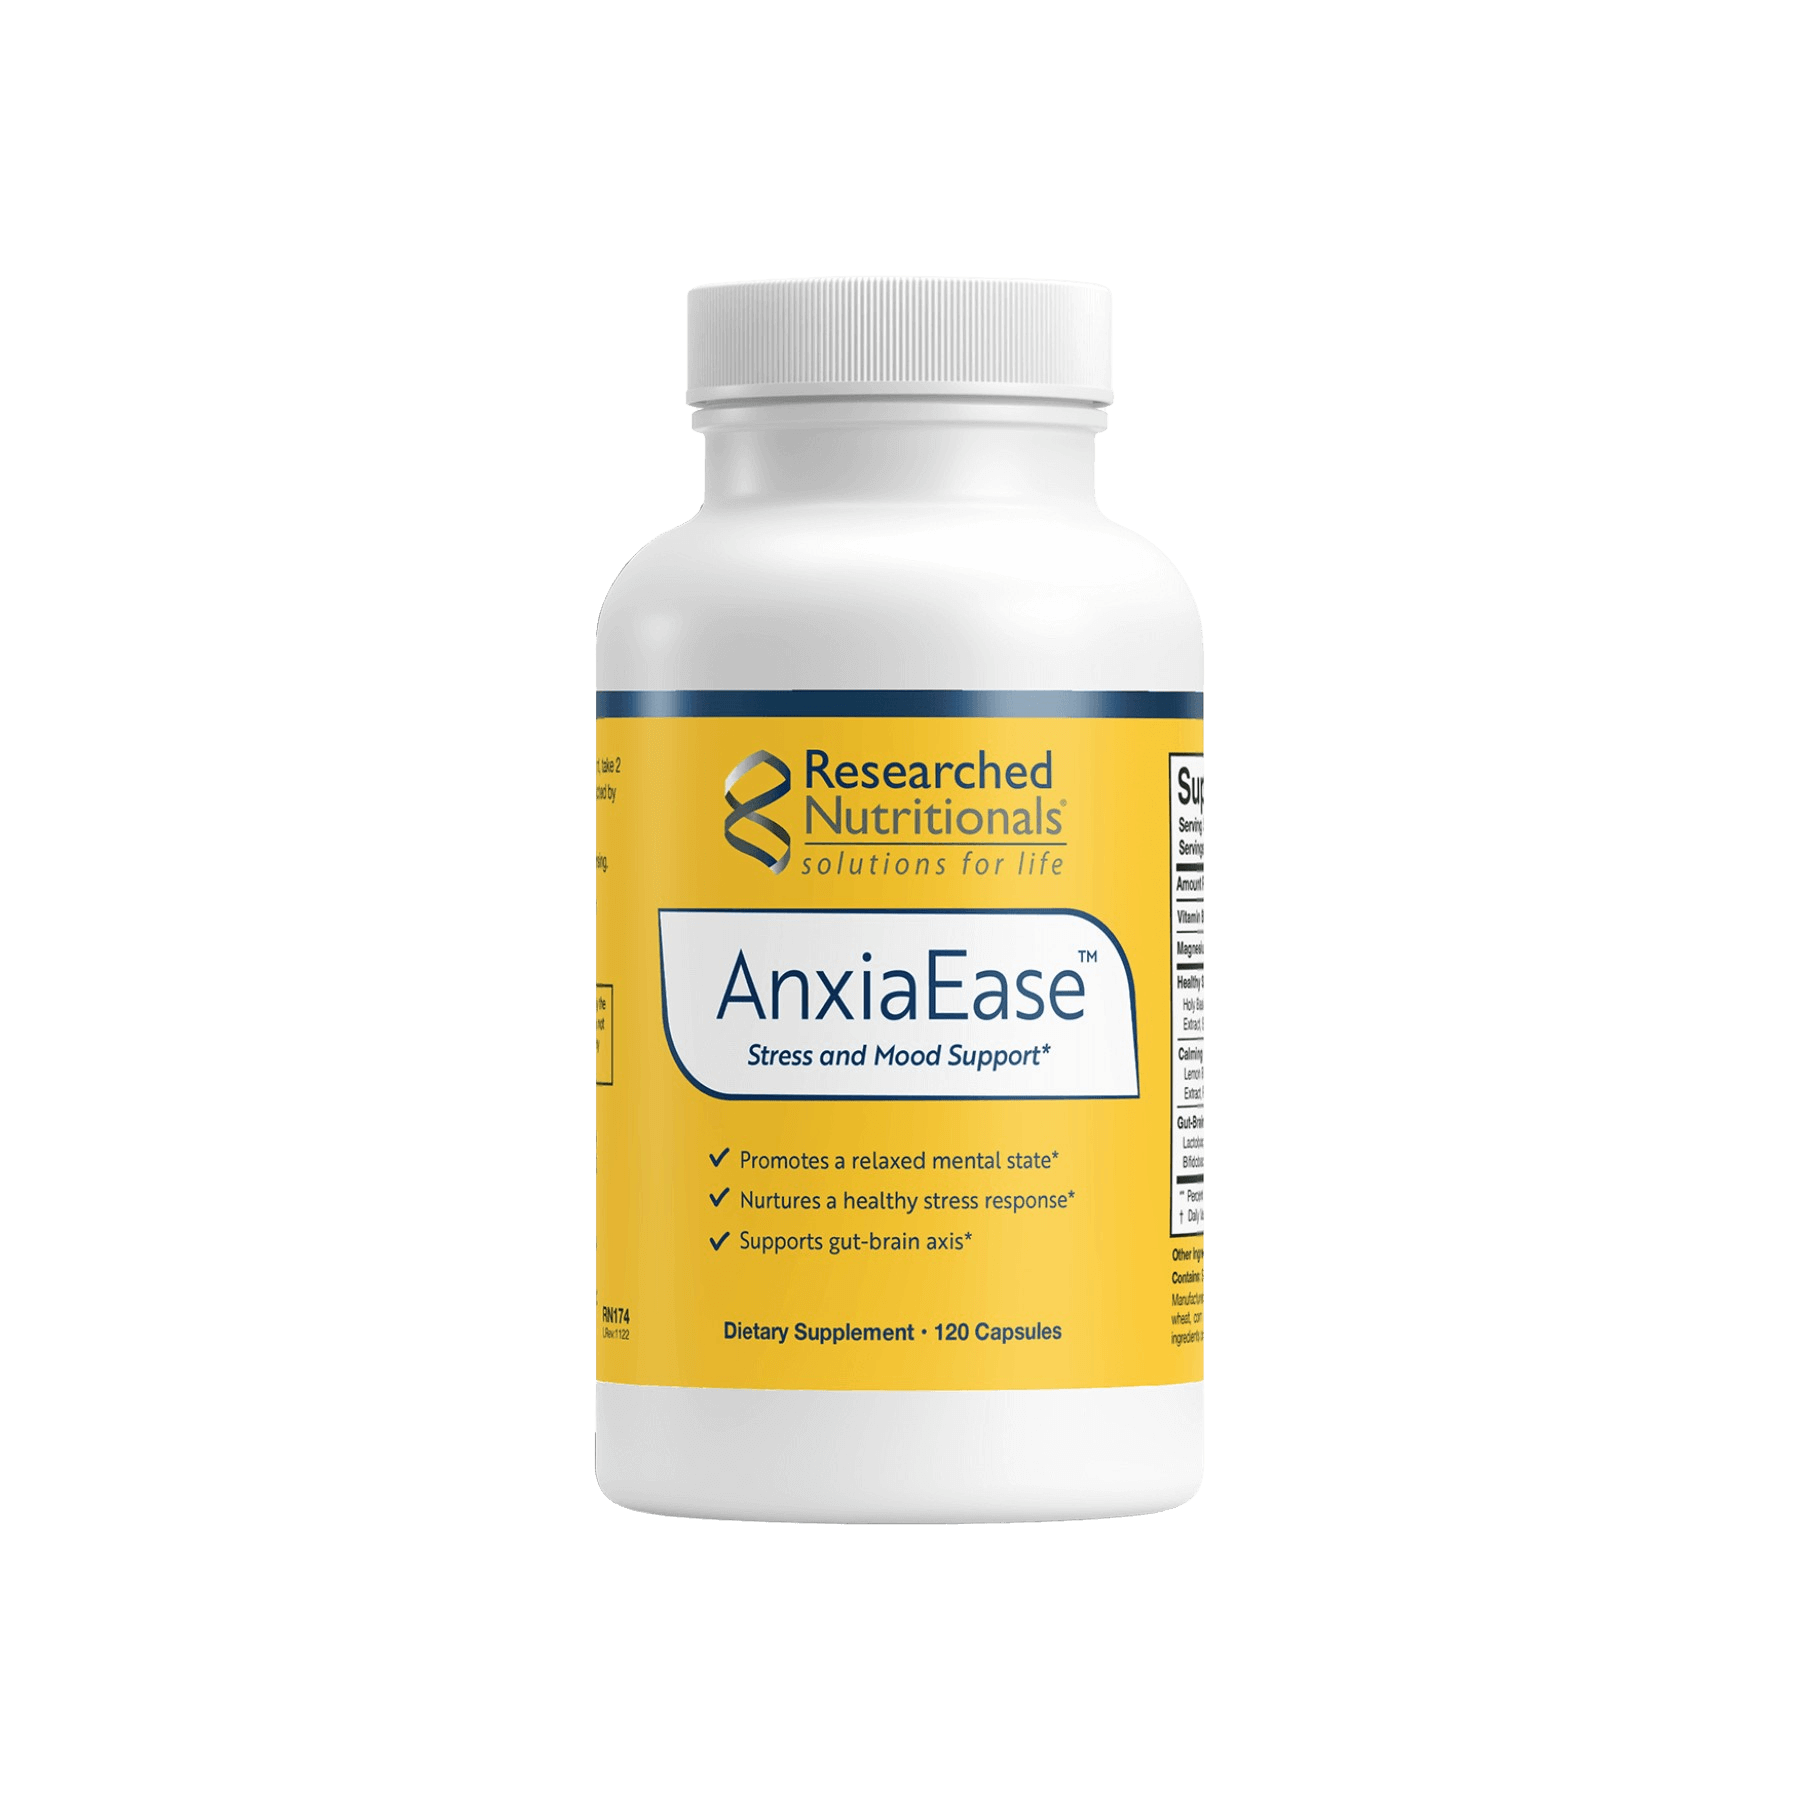 Researched Nutritionals Anxiaease Capsules in white bottle